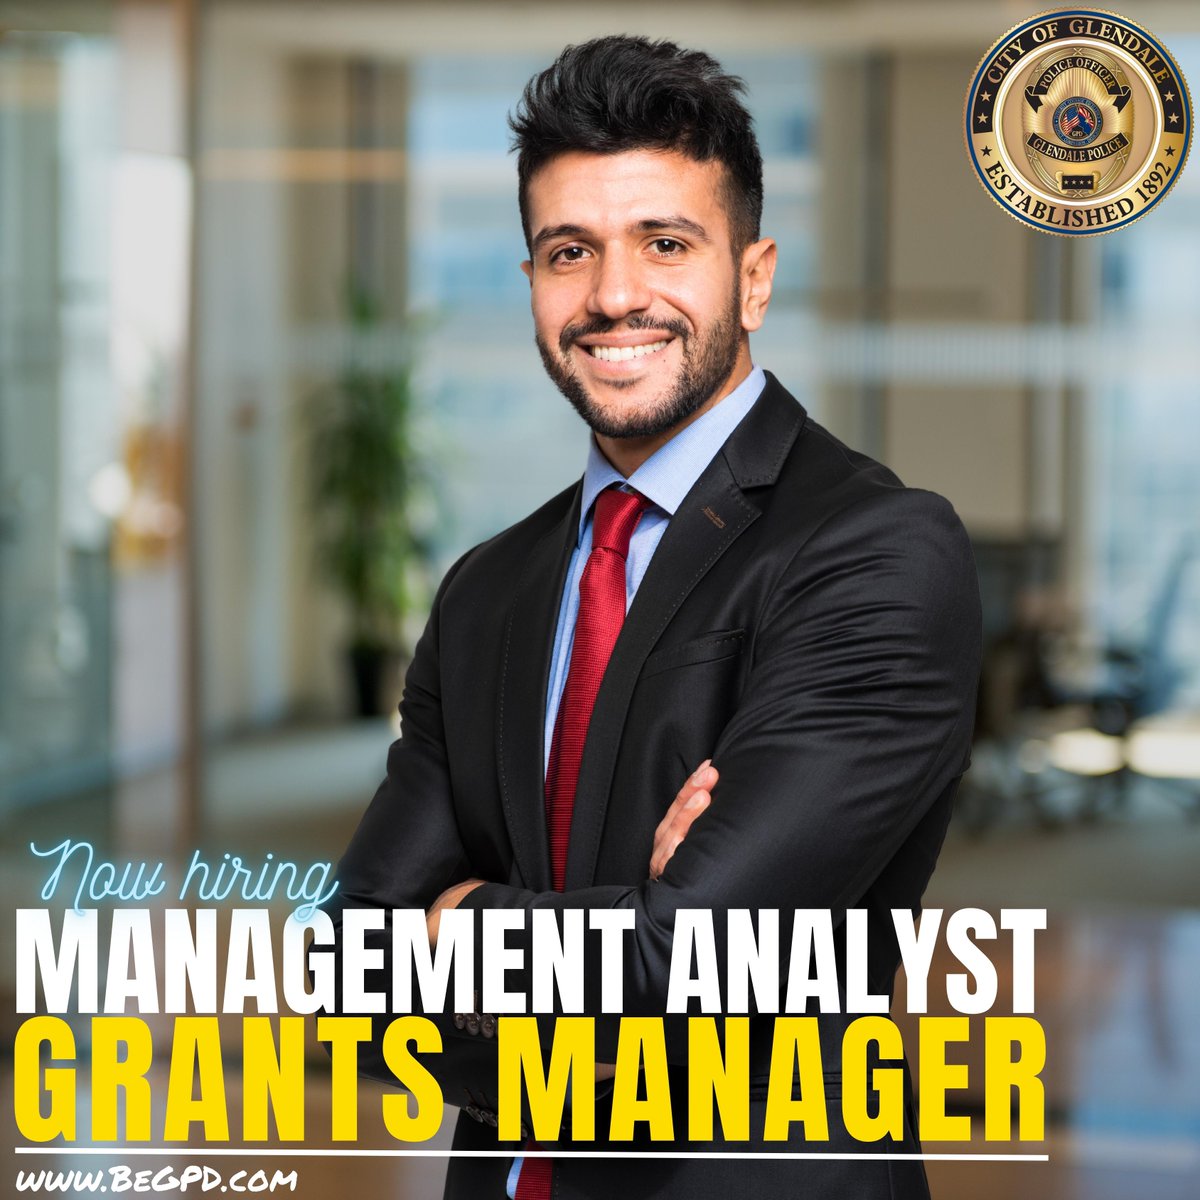 NOW HIRING: MANAGEMENT ASSISTANT/GRANTS MANAGER
SALARY: $57,241 - $85,861 ANNUALLY
APPLICATIONS ACCEPTED UNTIL: 11/5/2023

👉bit.ly/BeGPDGrantsMgr…

#BeGPD #police #PoliceJobs #lawenforcementjobs #grants #grantsmanager #finance #finances #financialanalyst #assistant